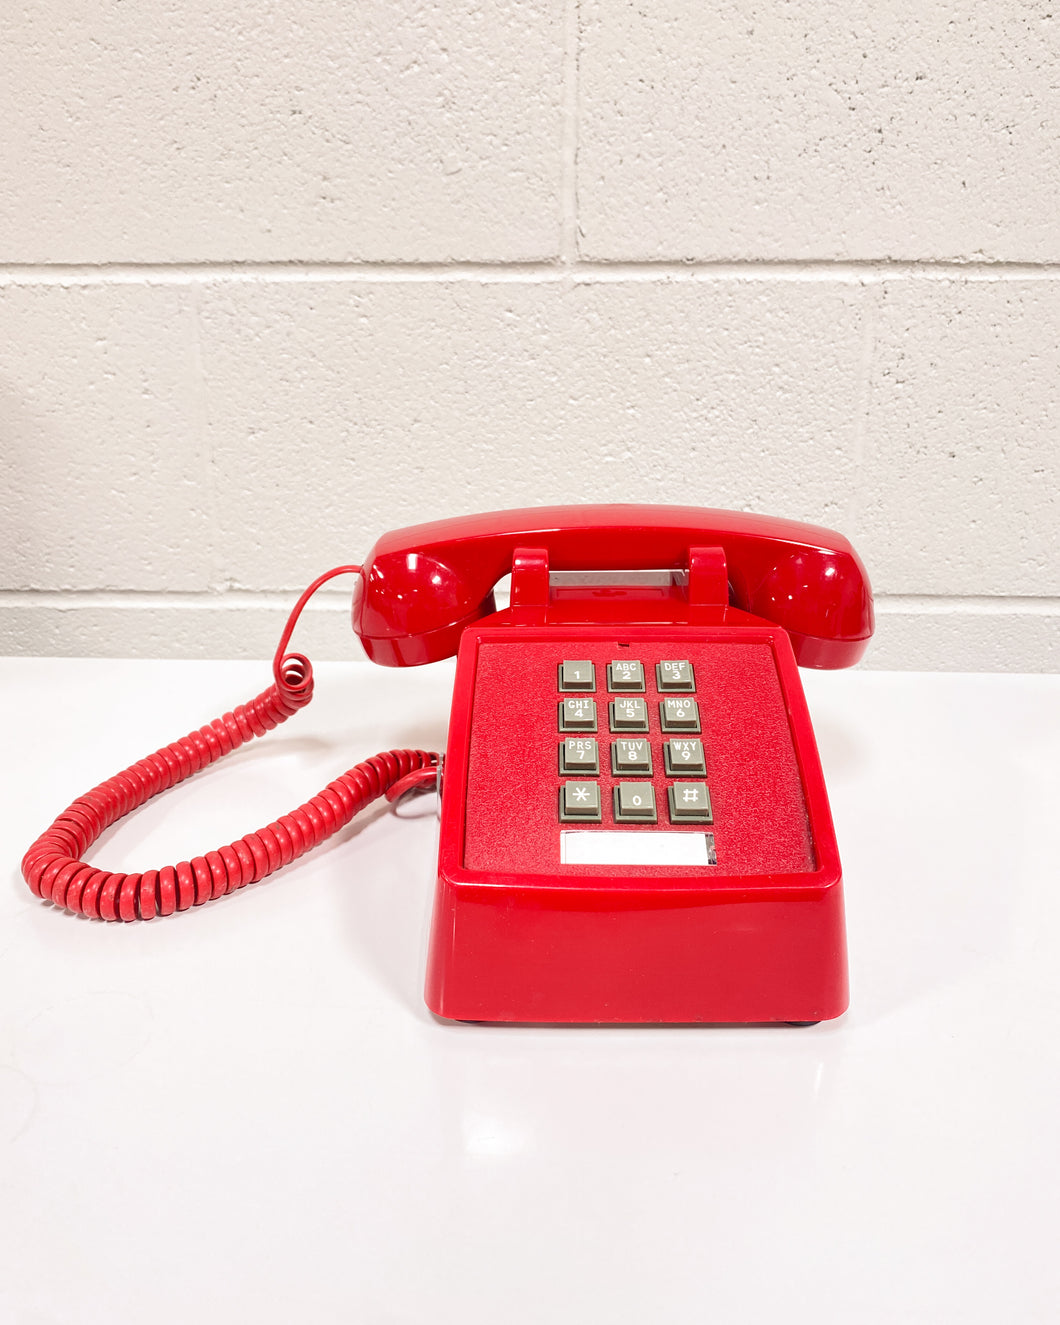 Vintage Cetis Red Touch-Tone Phone